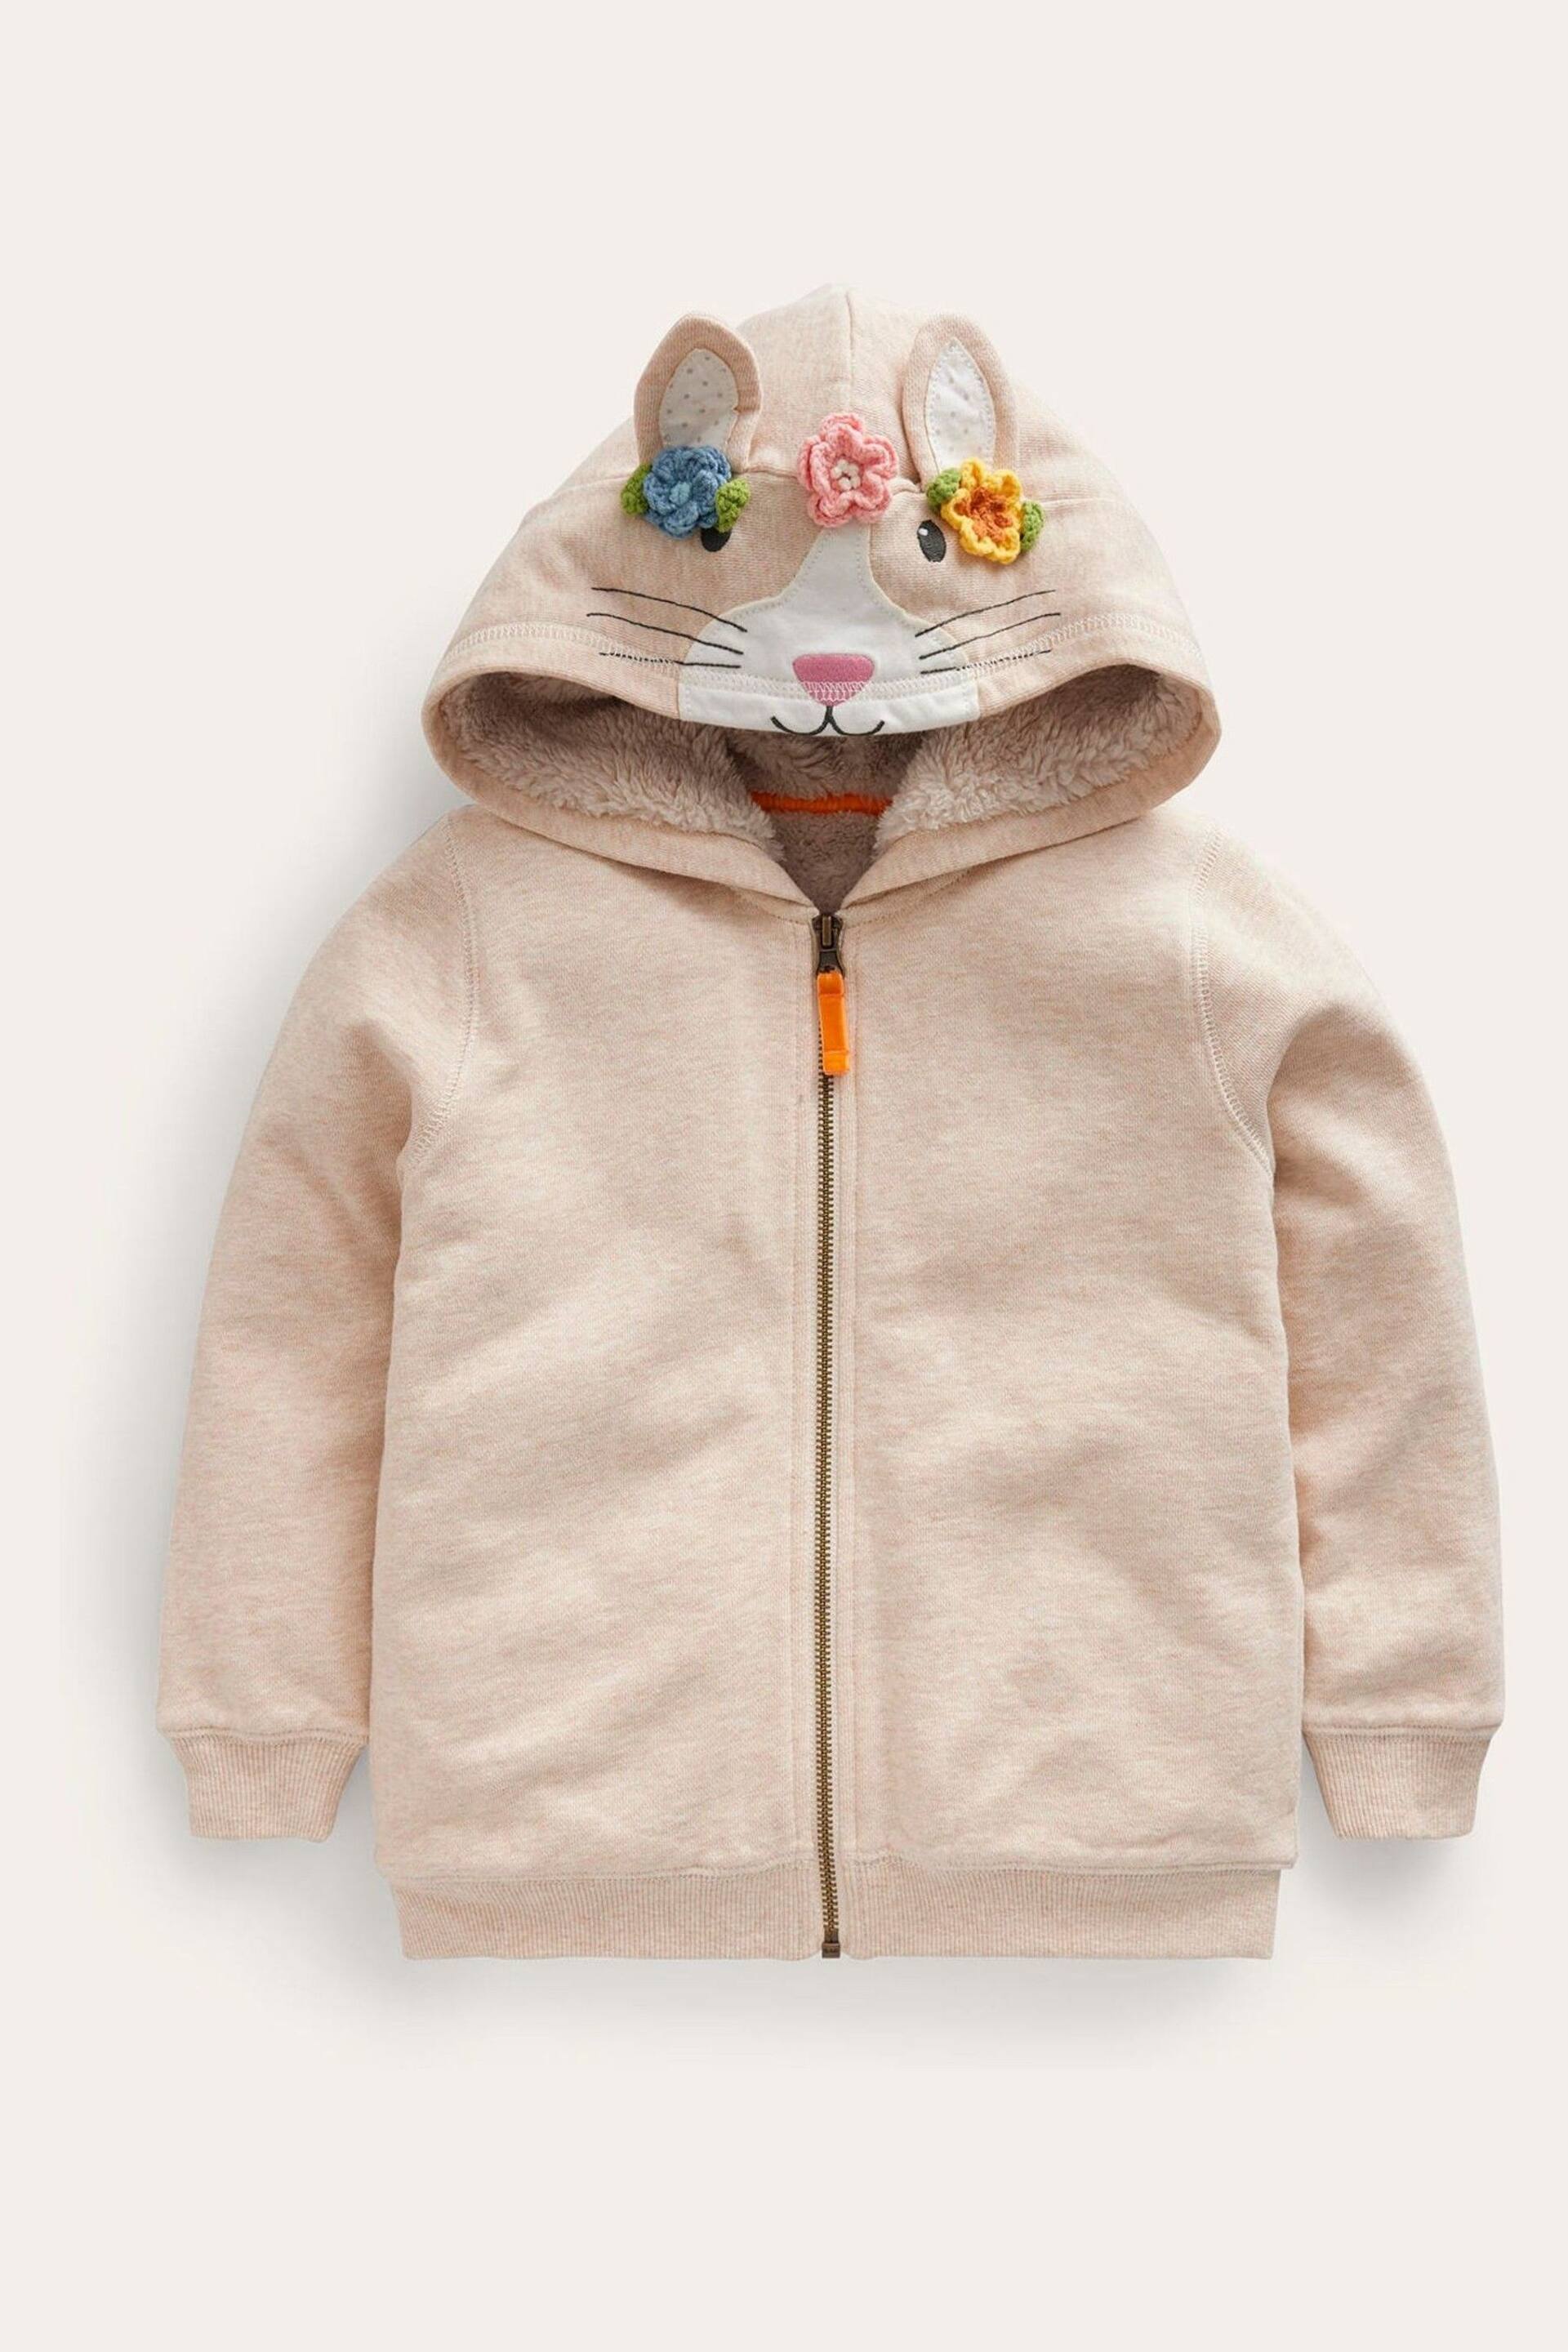 Boden Natural Fun Shaggy-Lined Rabbit Hoodie - Image 1 of 3